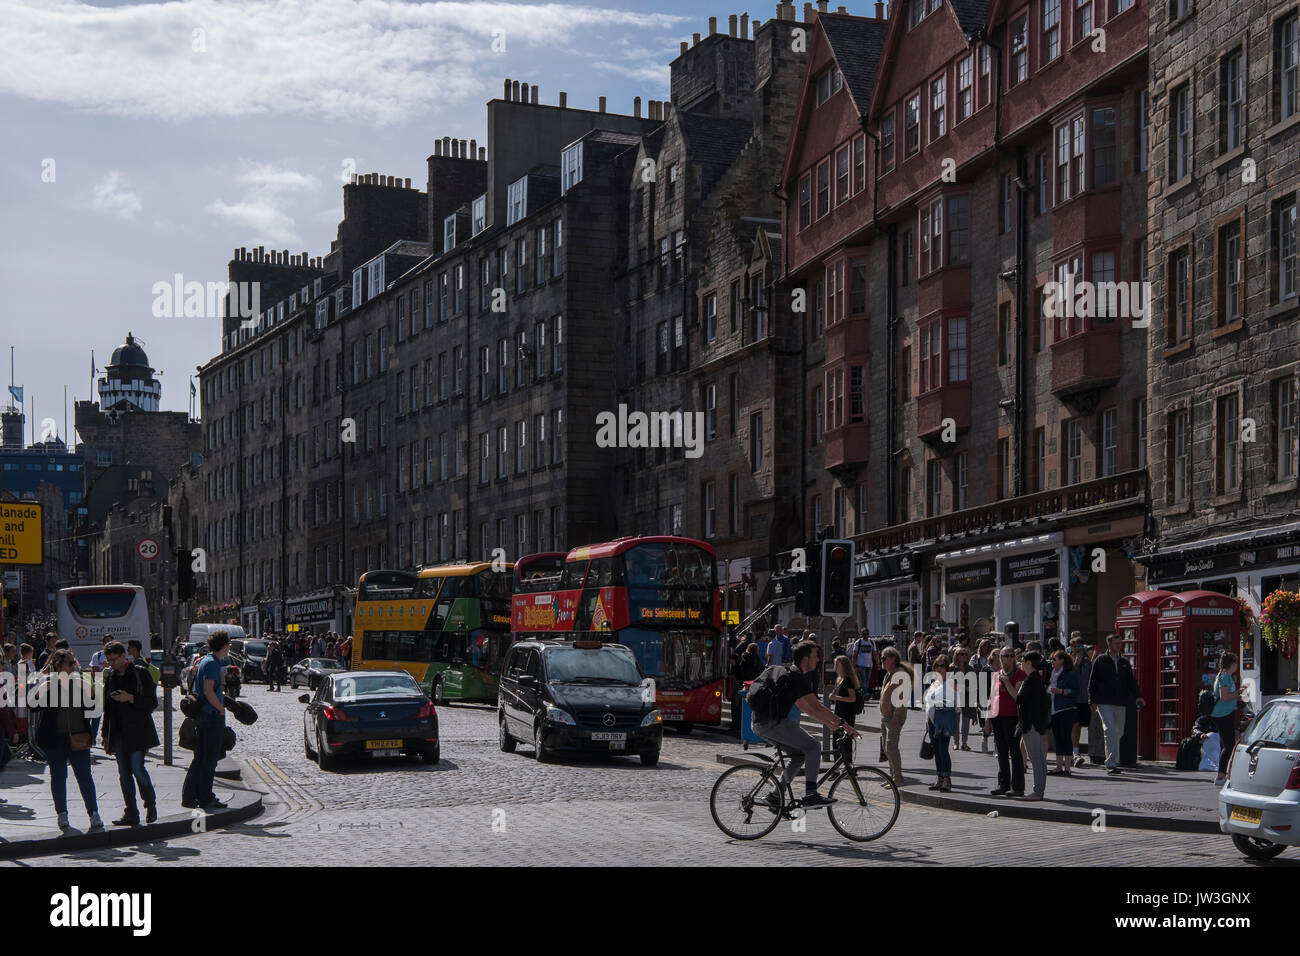 A lively street image in Summer with people and buses of the Royal Mile in Edinburgh, Scotland. Stock Photo